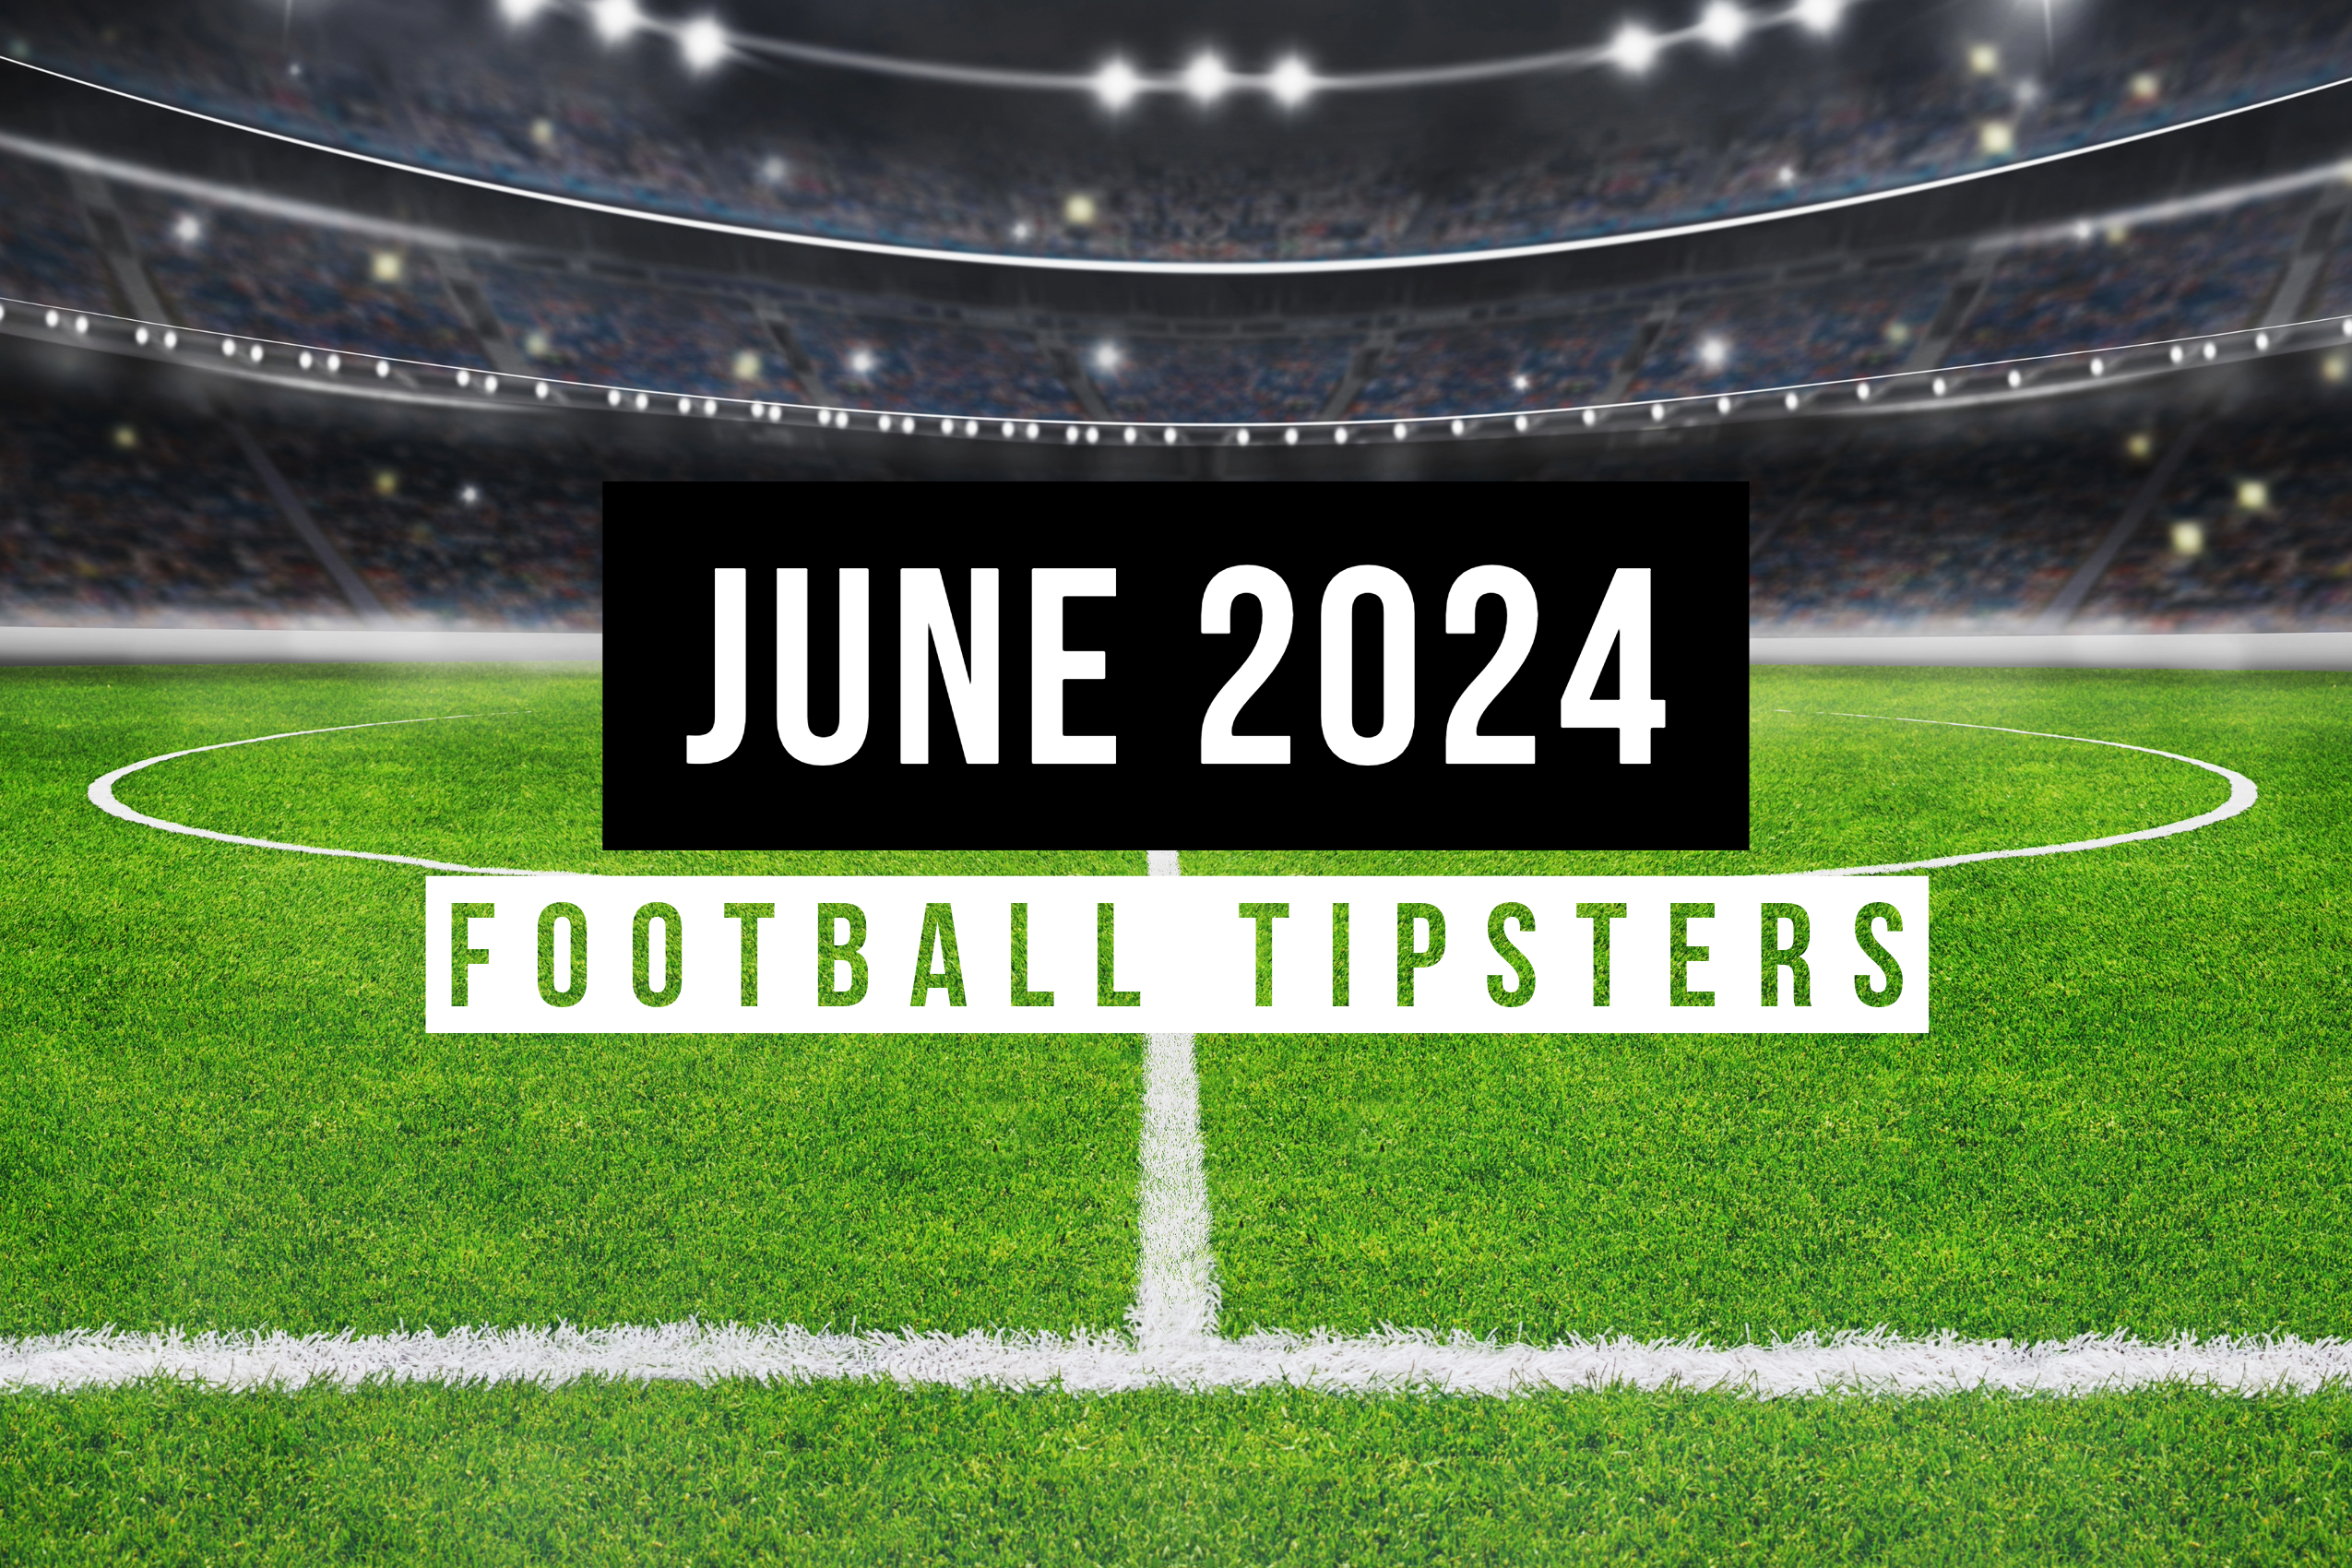 June 2024 | Top Football Tipsters Of The Month